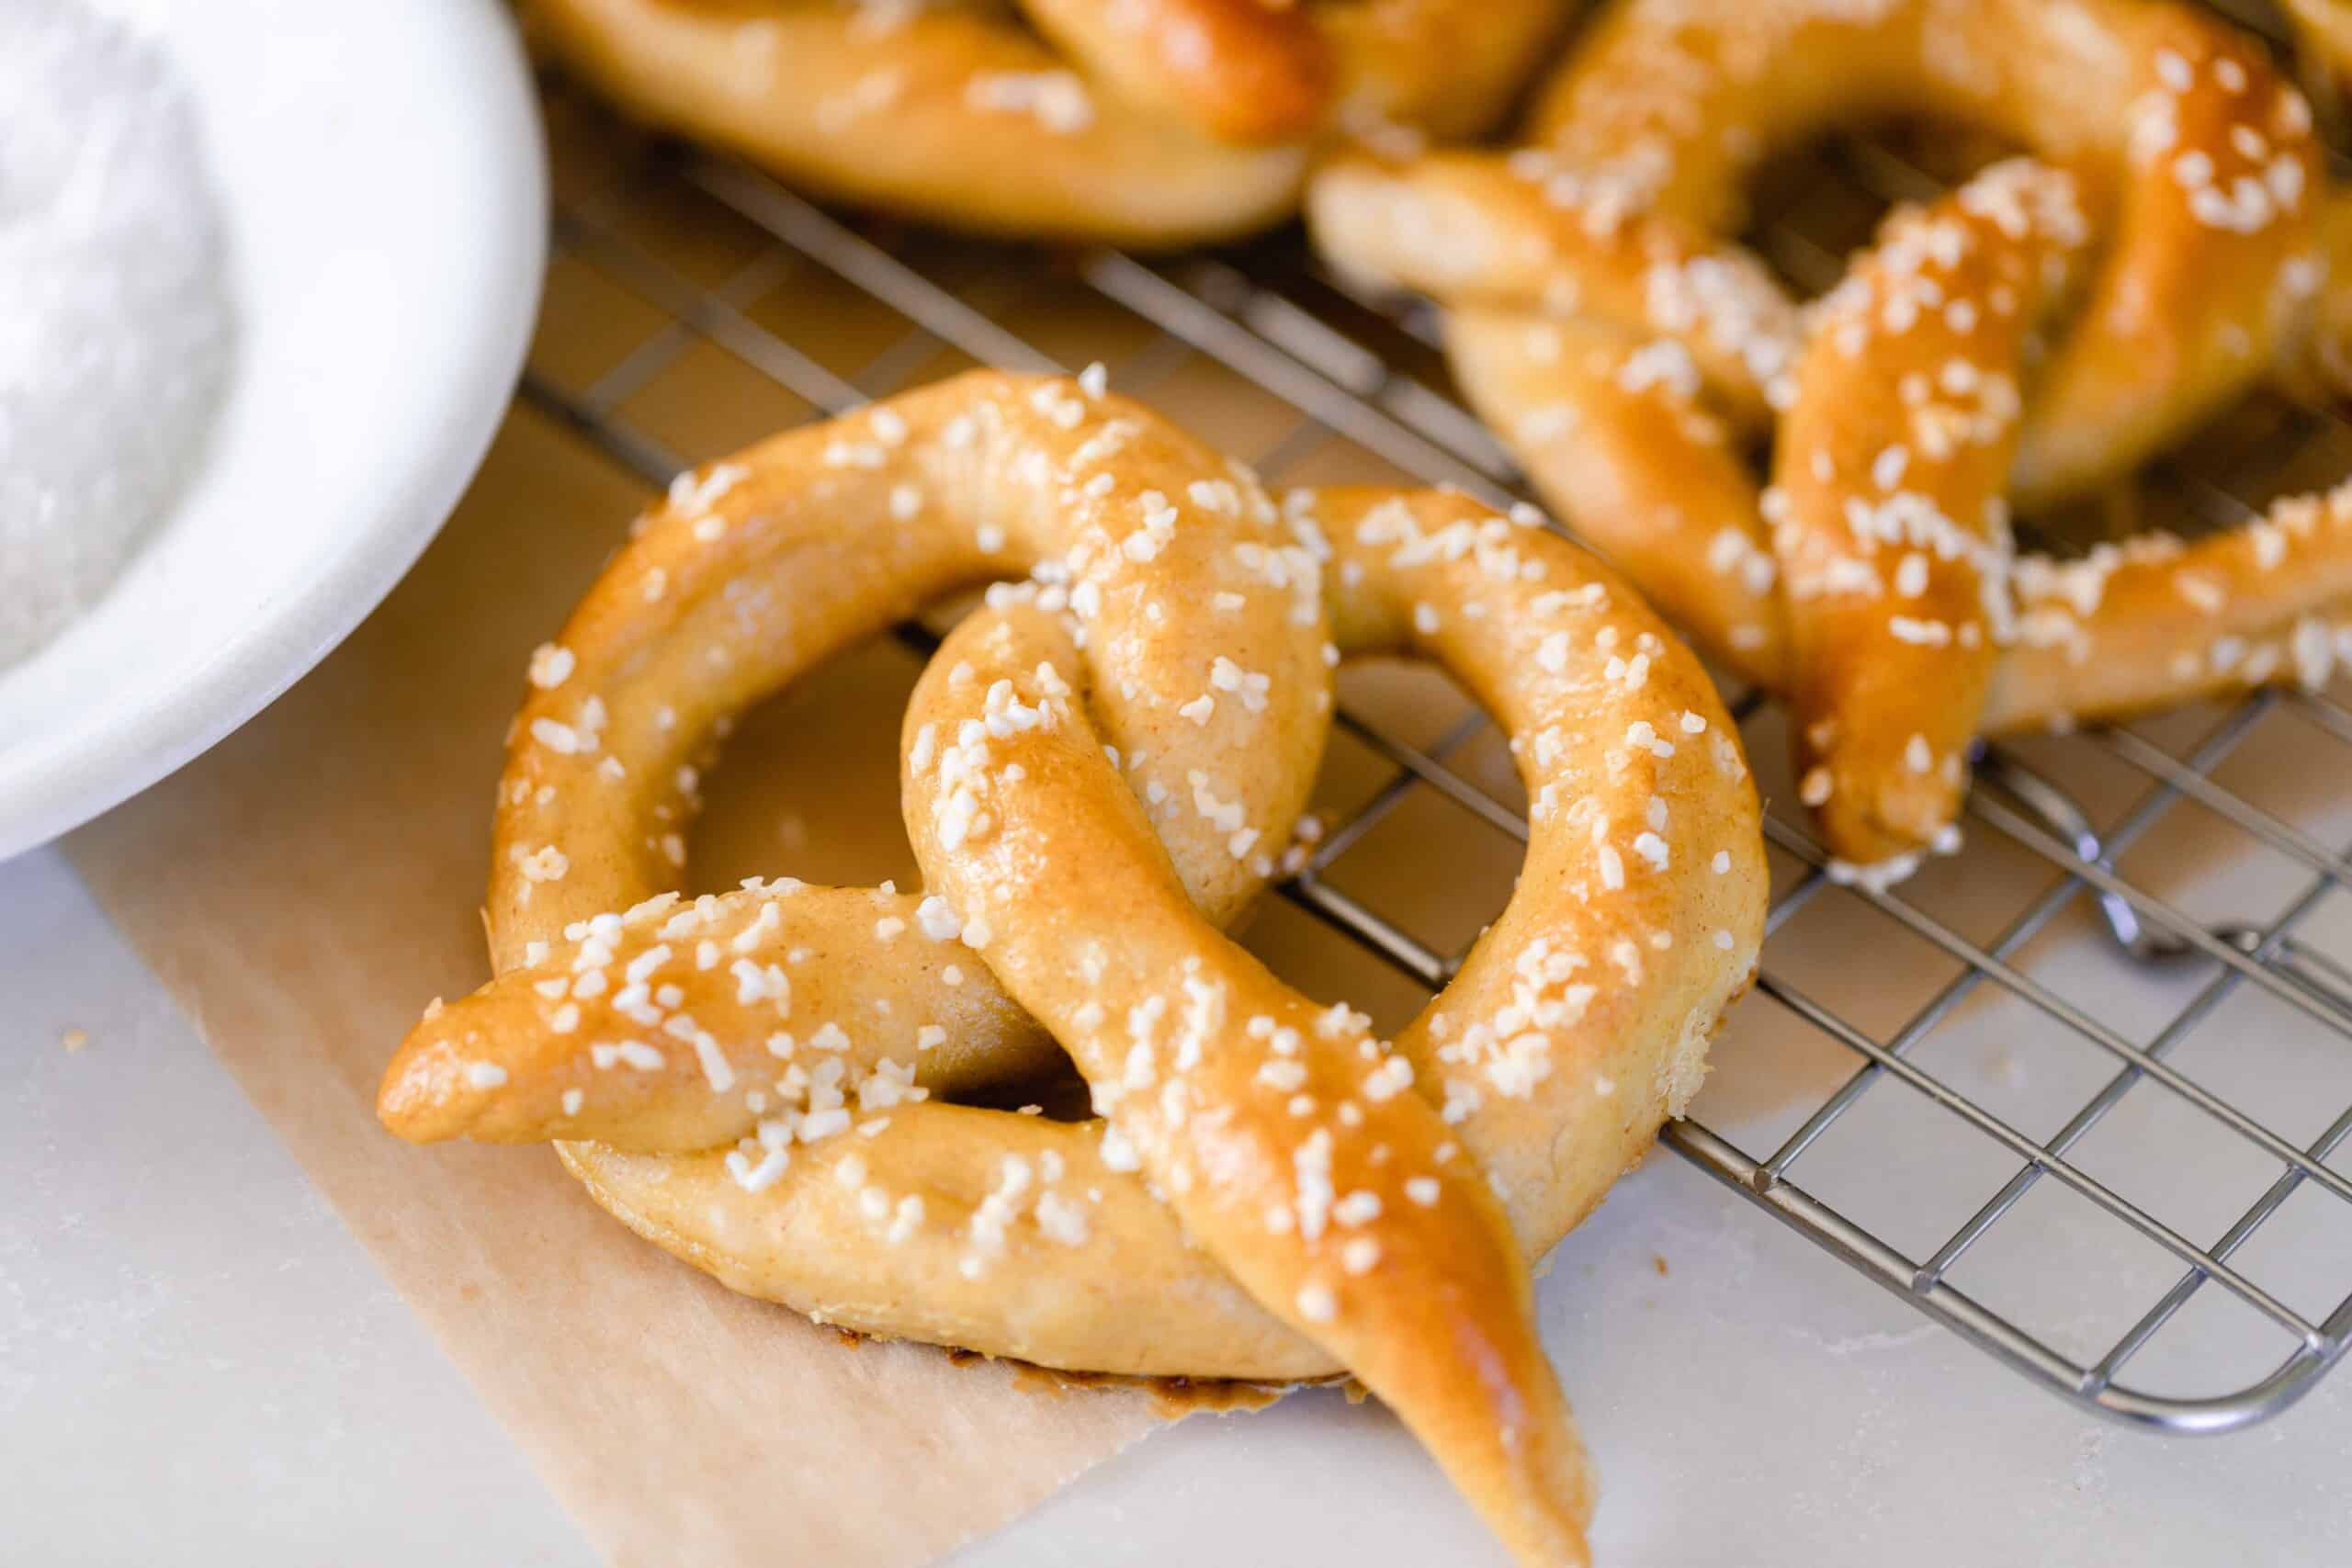 sourdough pretzel topped with course salt on a wire cooling wrack with more pretzels